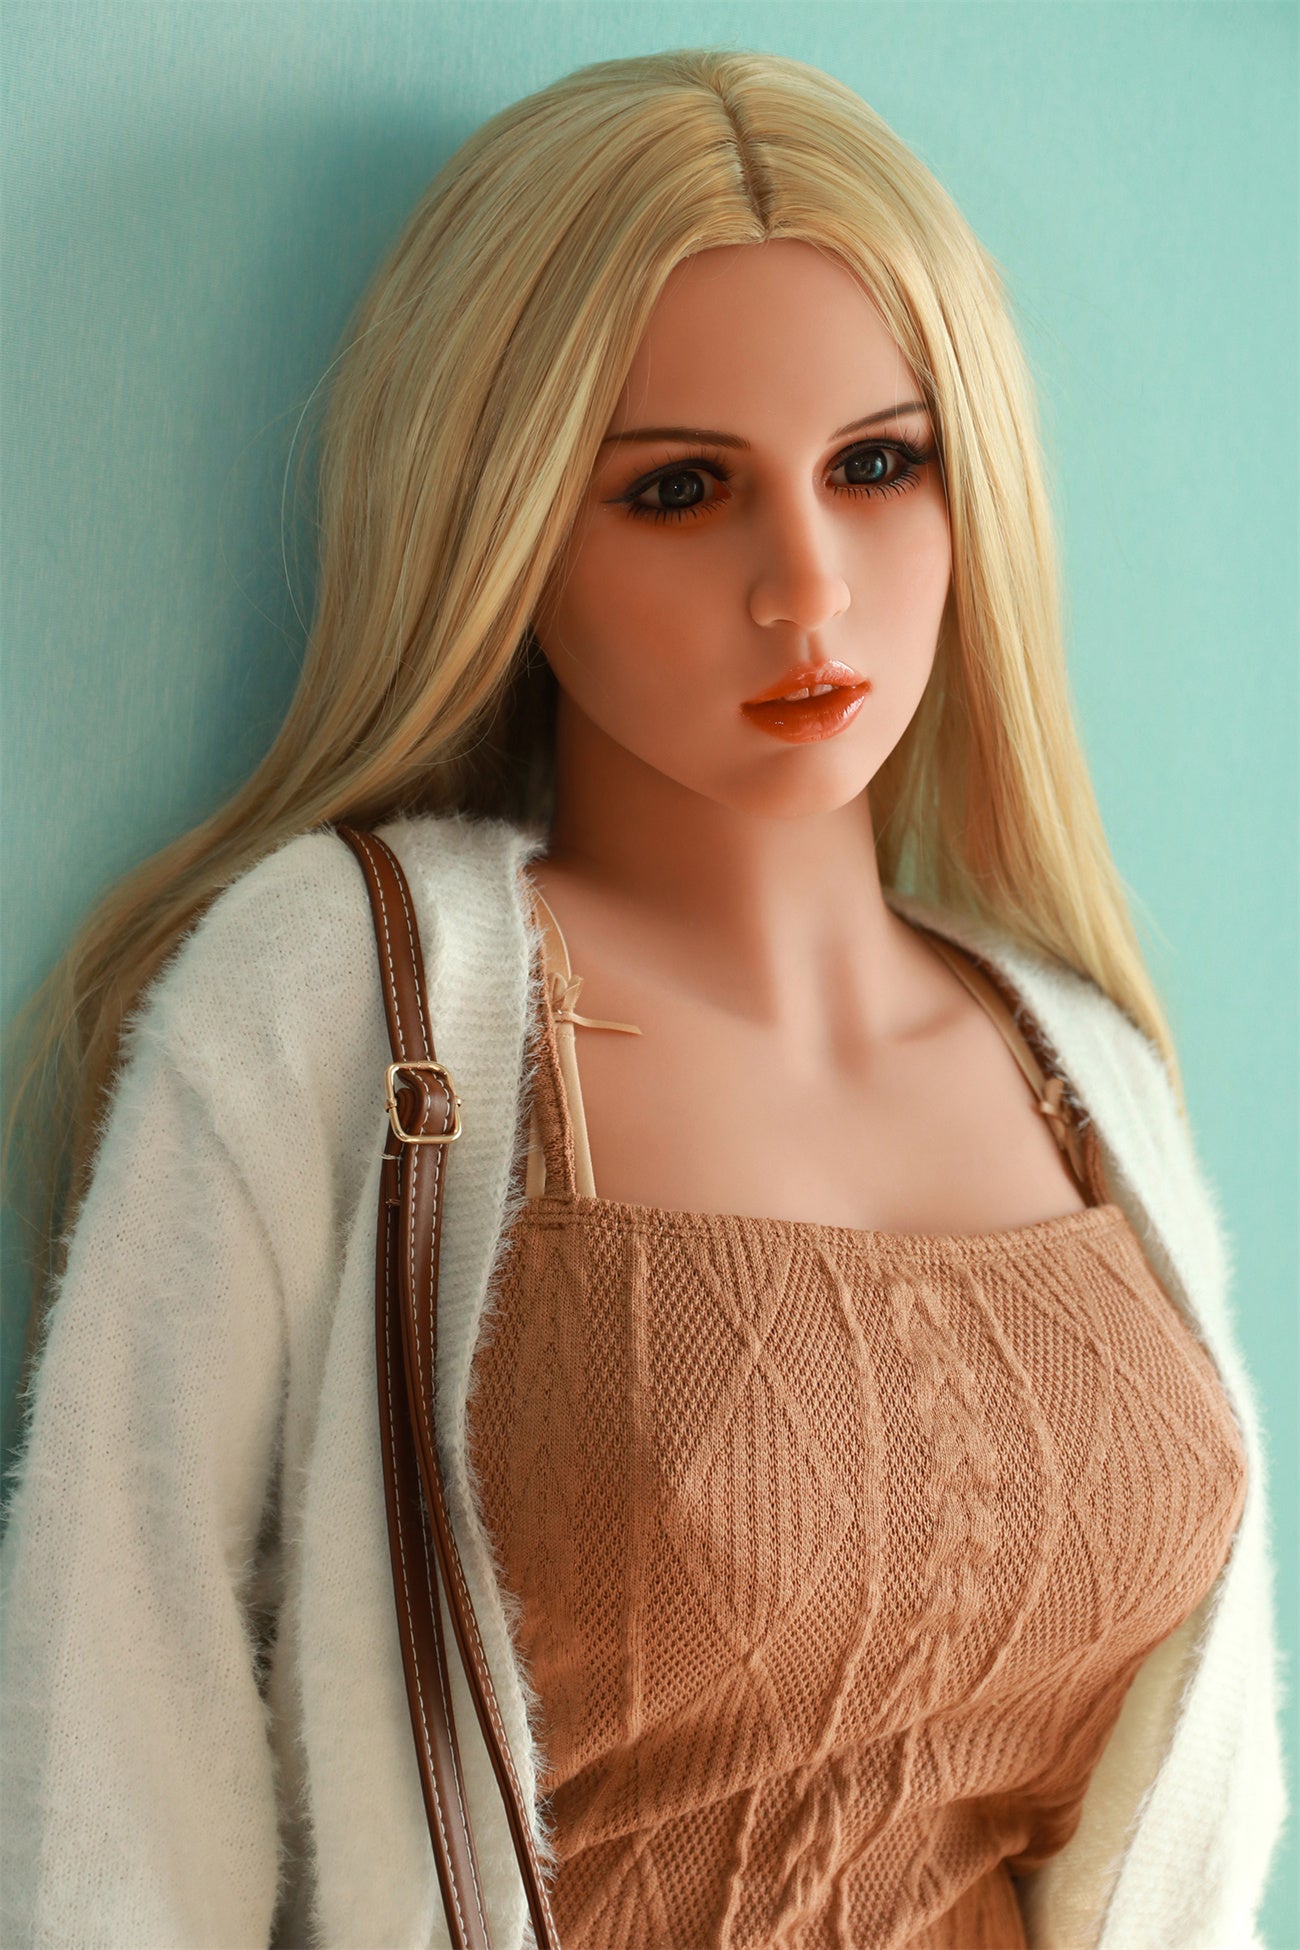 Blonde sex doll Lotte with a full figure and large D-cup breasts